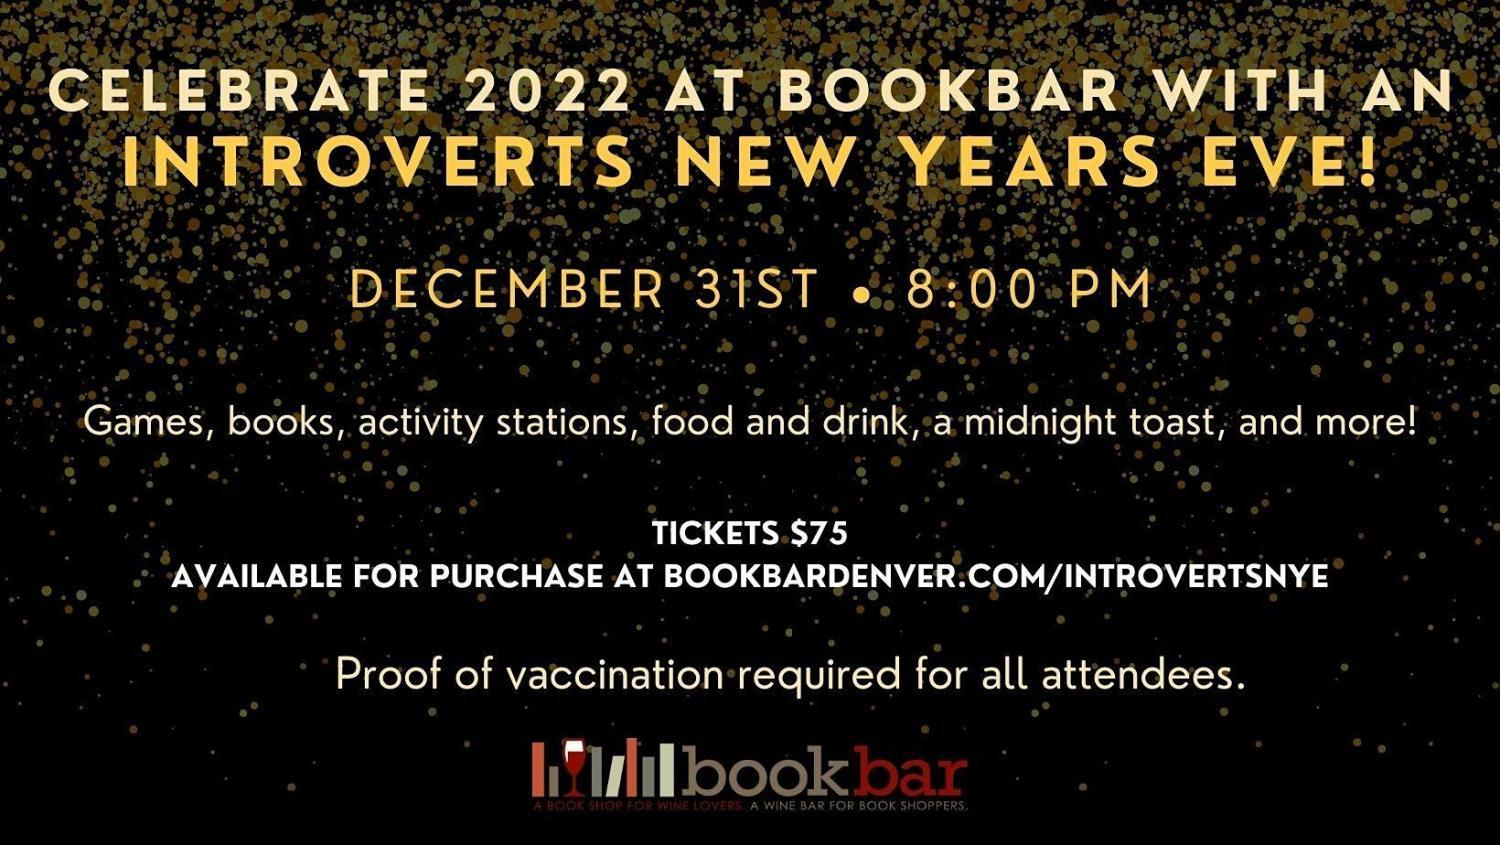 Annual Introverts' New Years Eve at BookBar!